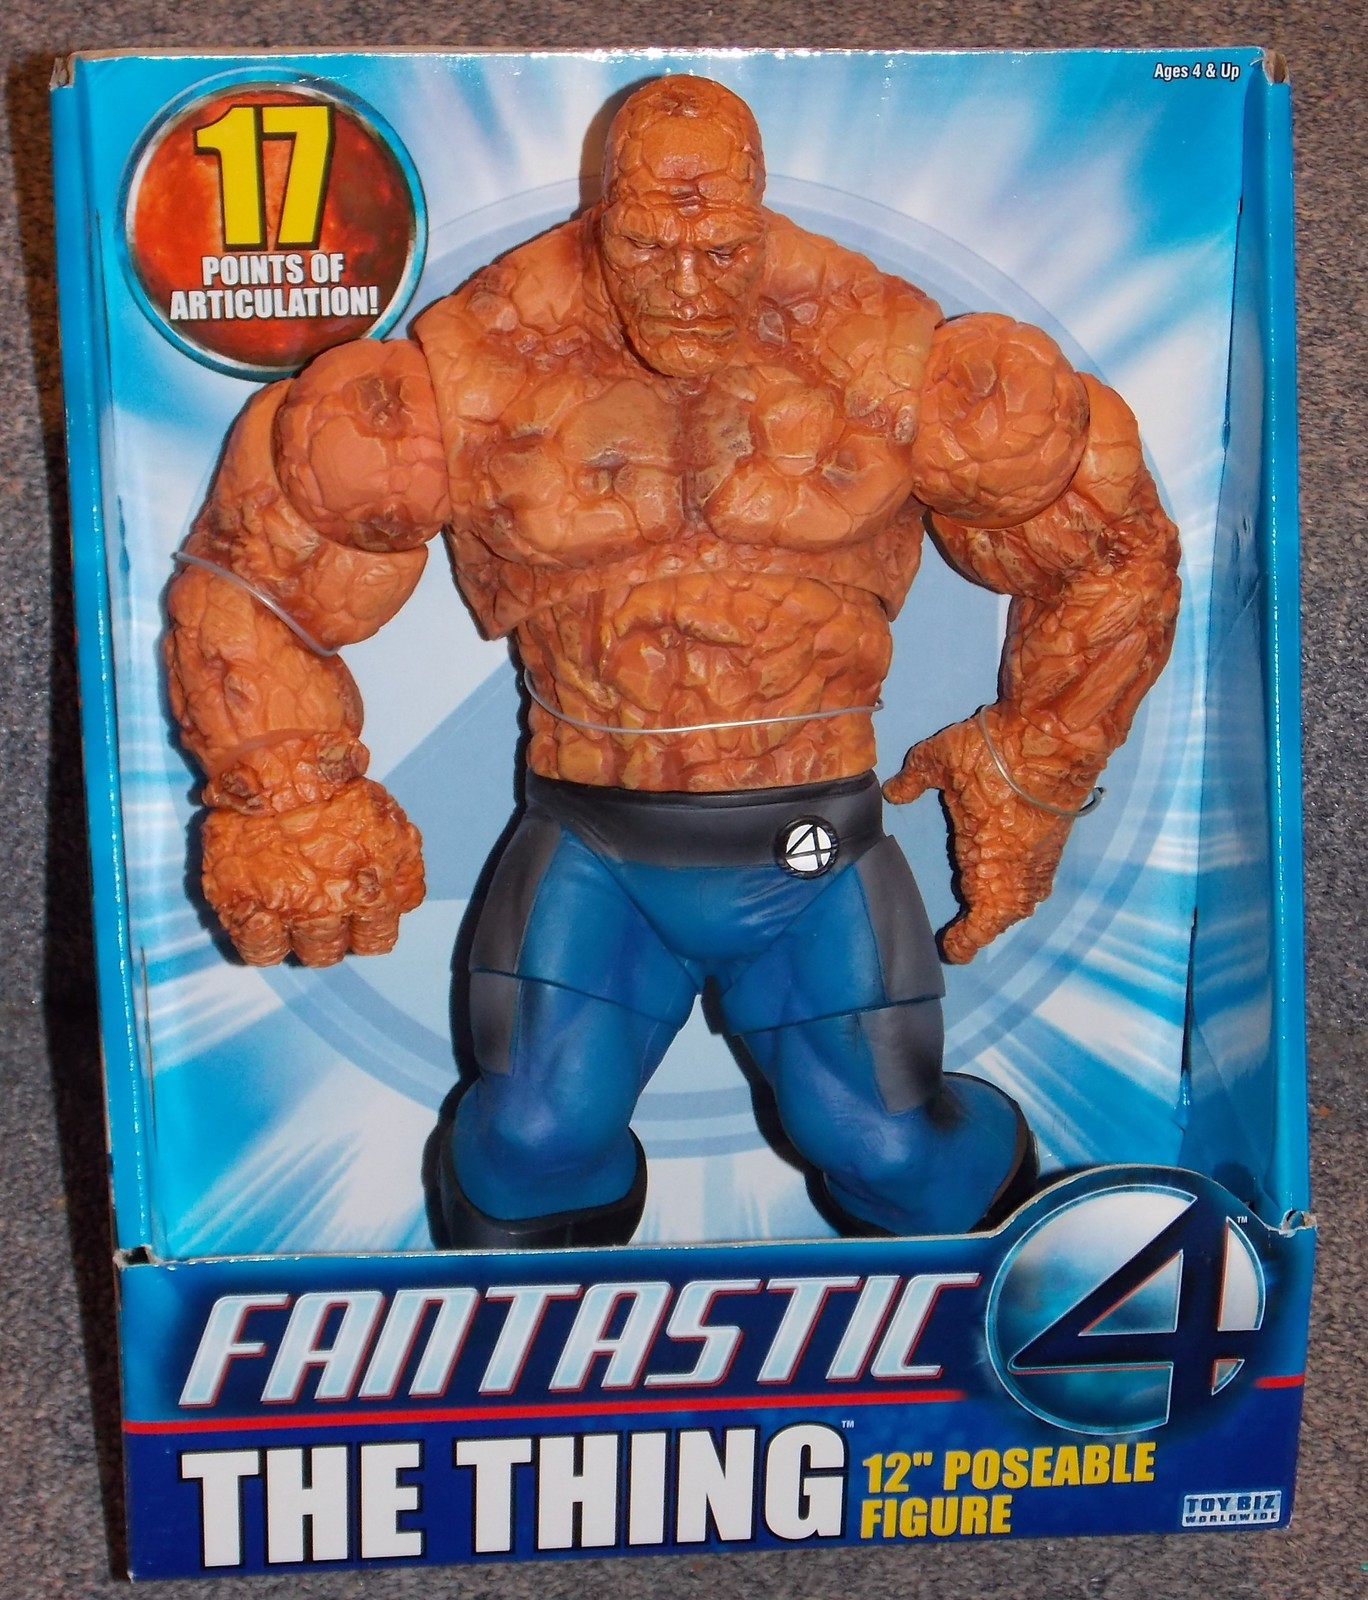 2005 Marvel Fantastic 4 The Thing 12 inch Movie Figure New In The Box - $99.99